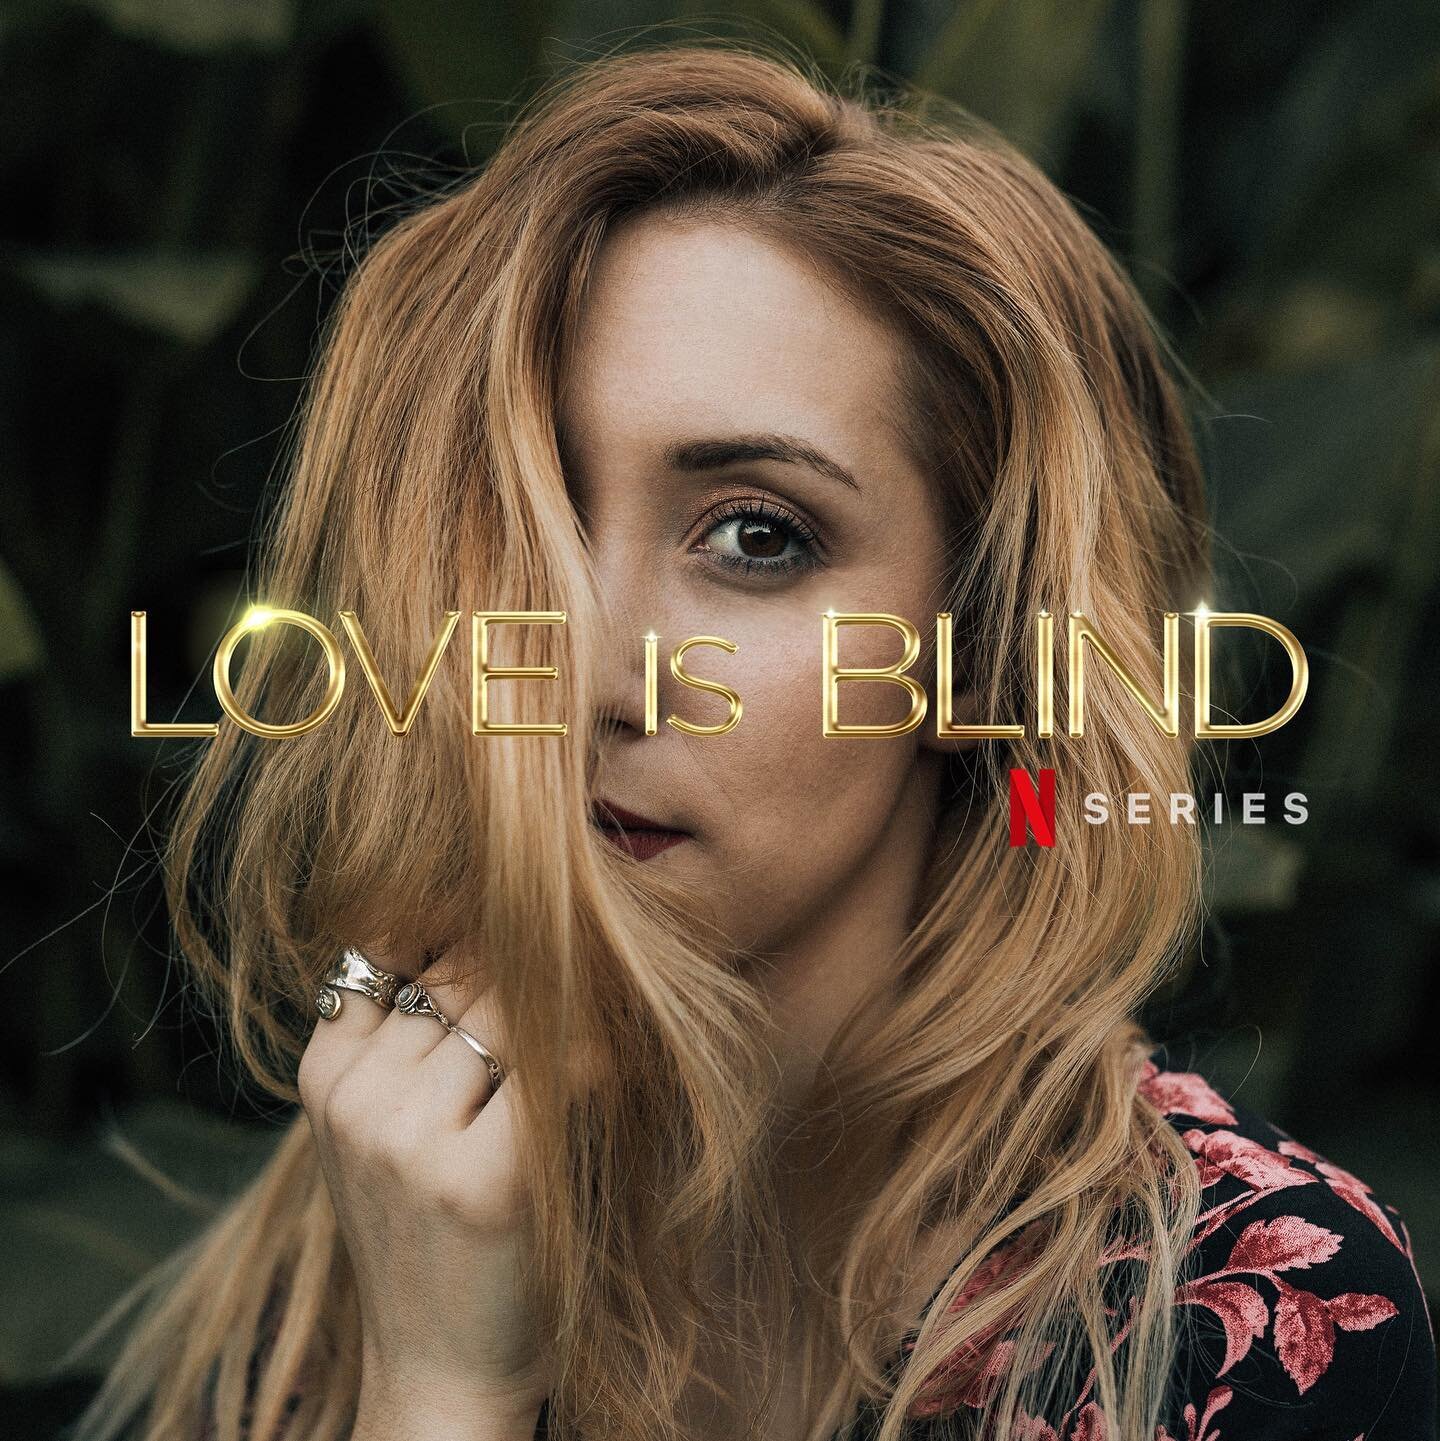 2 songs on @NETFLIX&rsquo;s LOVE IS BLIND S2 🌹w/ @iamflorio 
✨DON&rsquo;T TELL (unreleased) Ep1 
✨COLD IN THE SUMMER (a favy, unreleased) Ep2

🤍 thx @lyrichousela